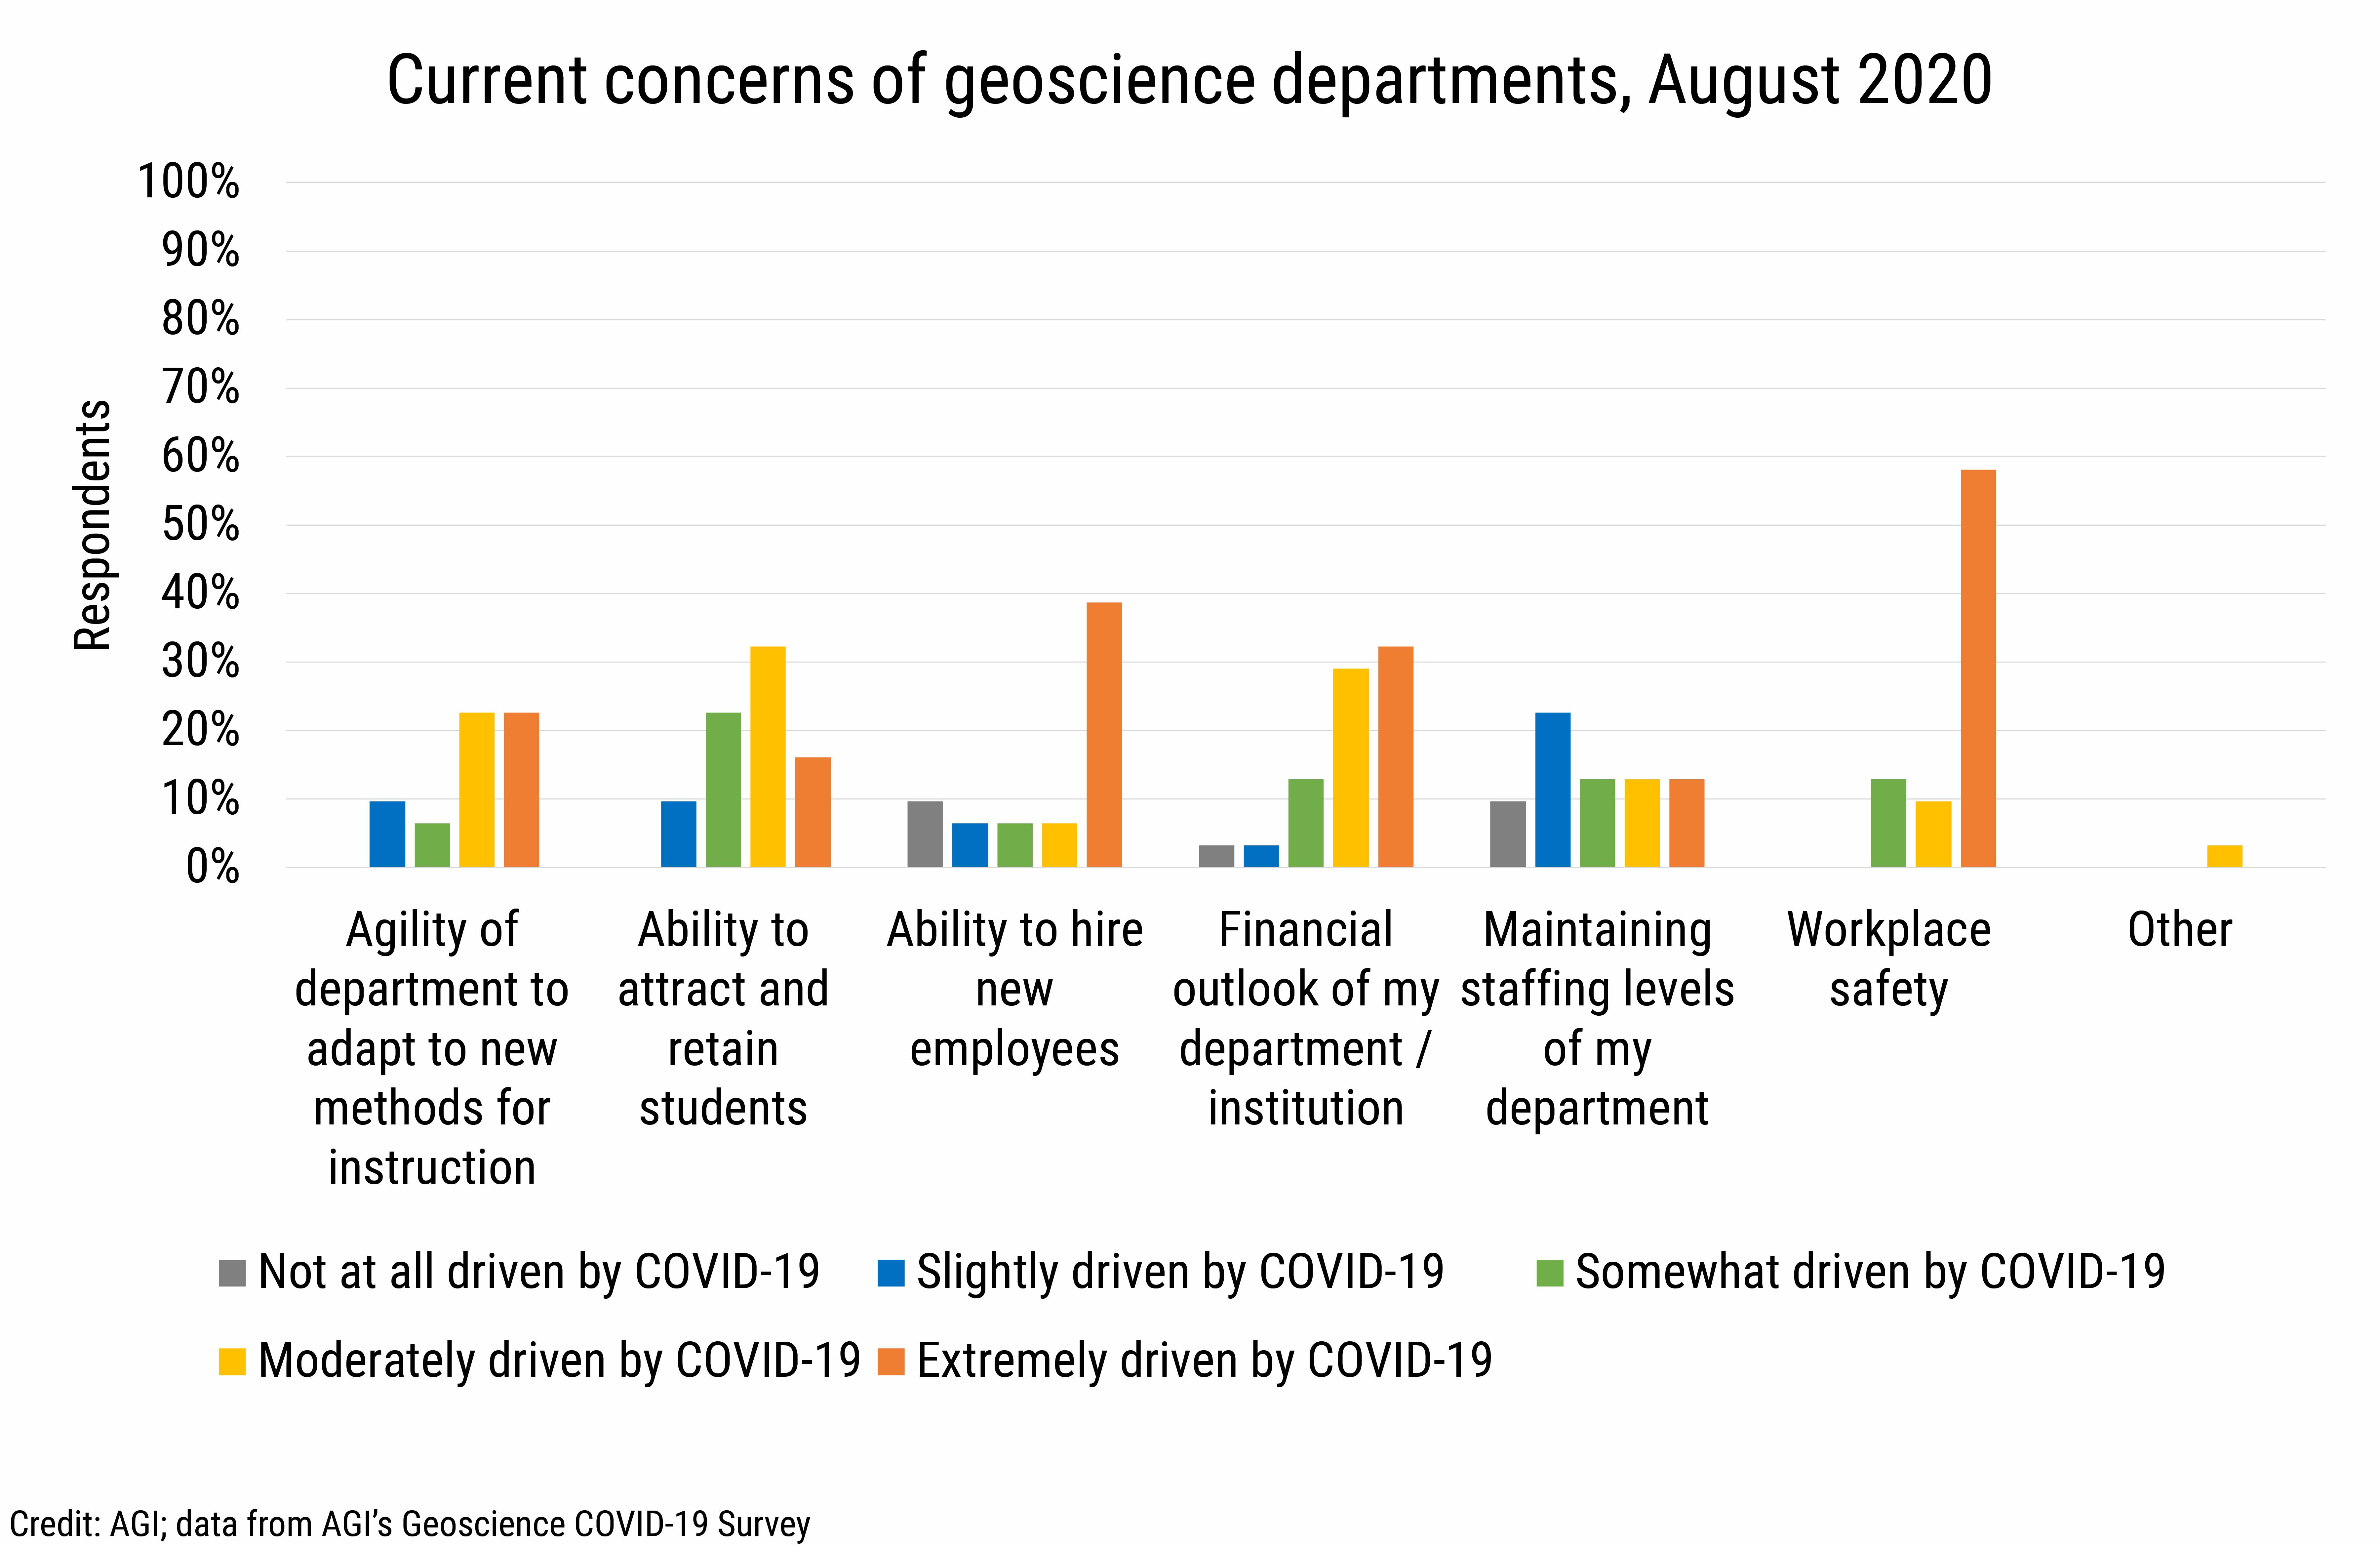 DB_2020-018 chart01: Current concerns of geoscience departments, August 2020 (credit: AGI, data from AGI&#039;s Geoscience COVID-19 Survey)